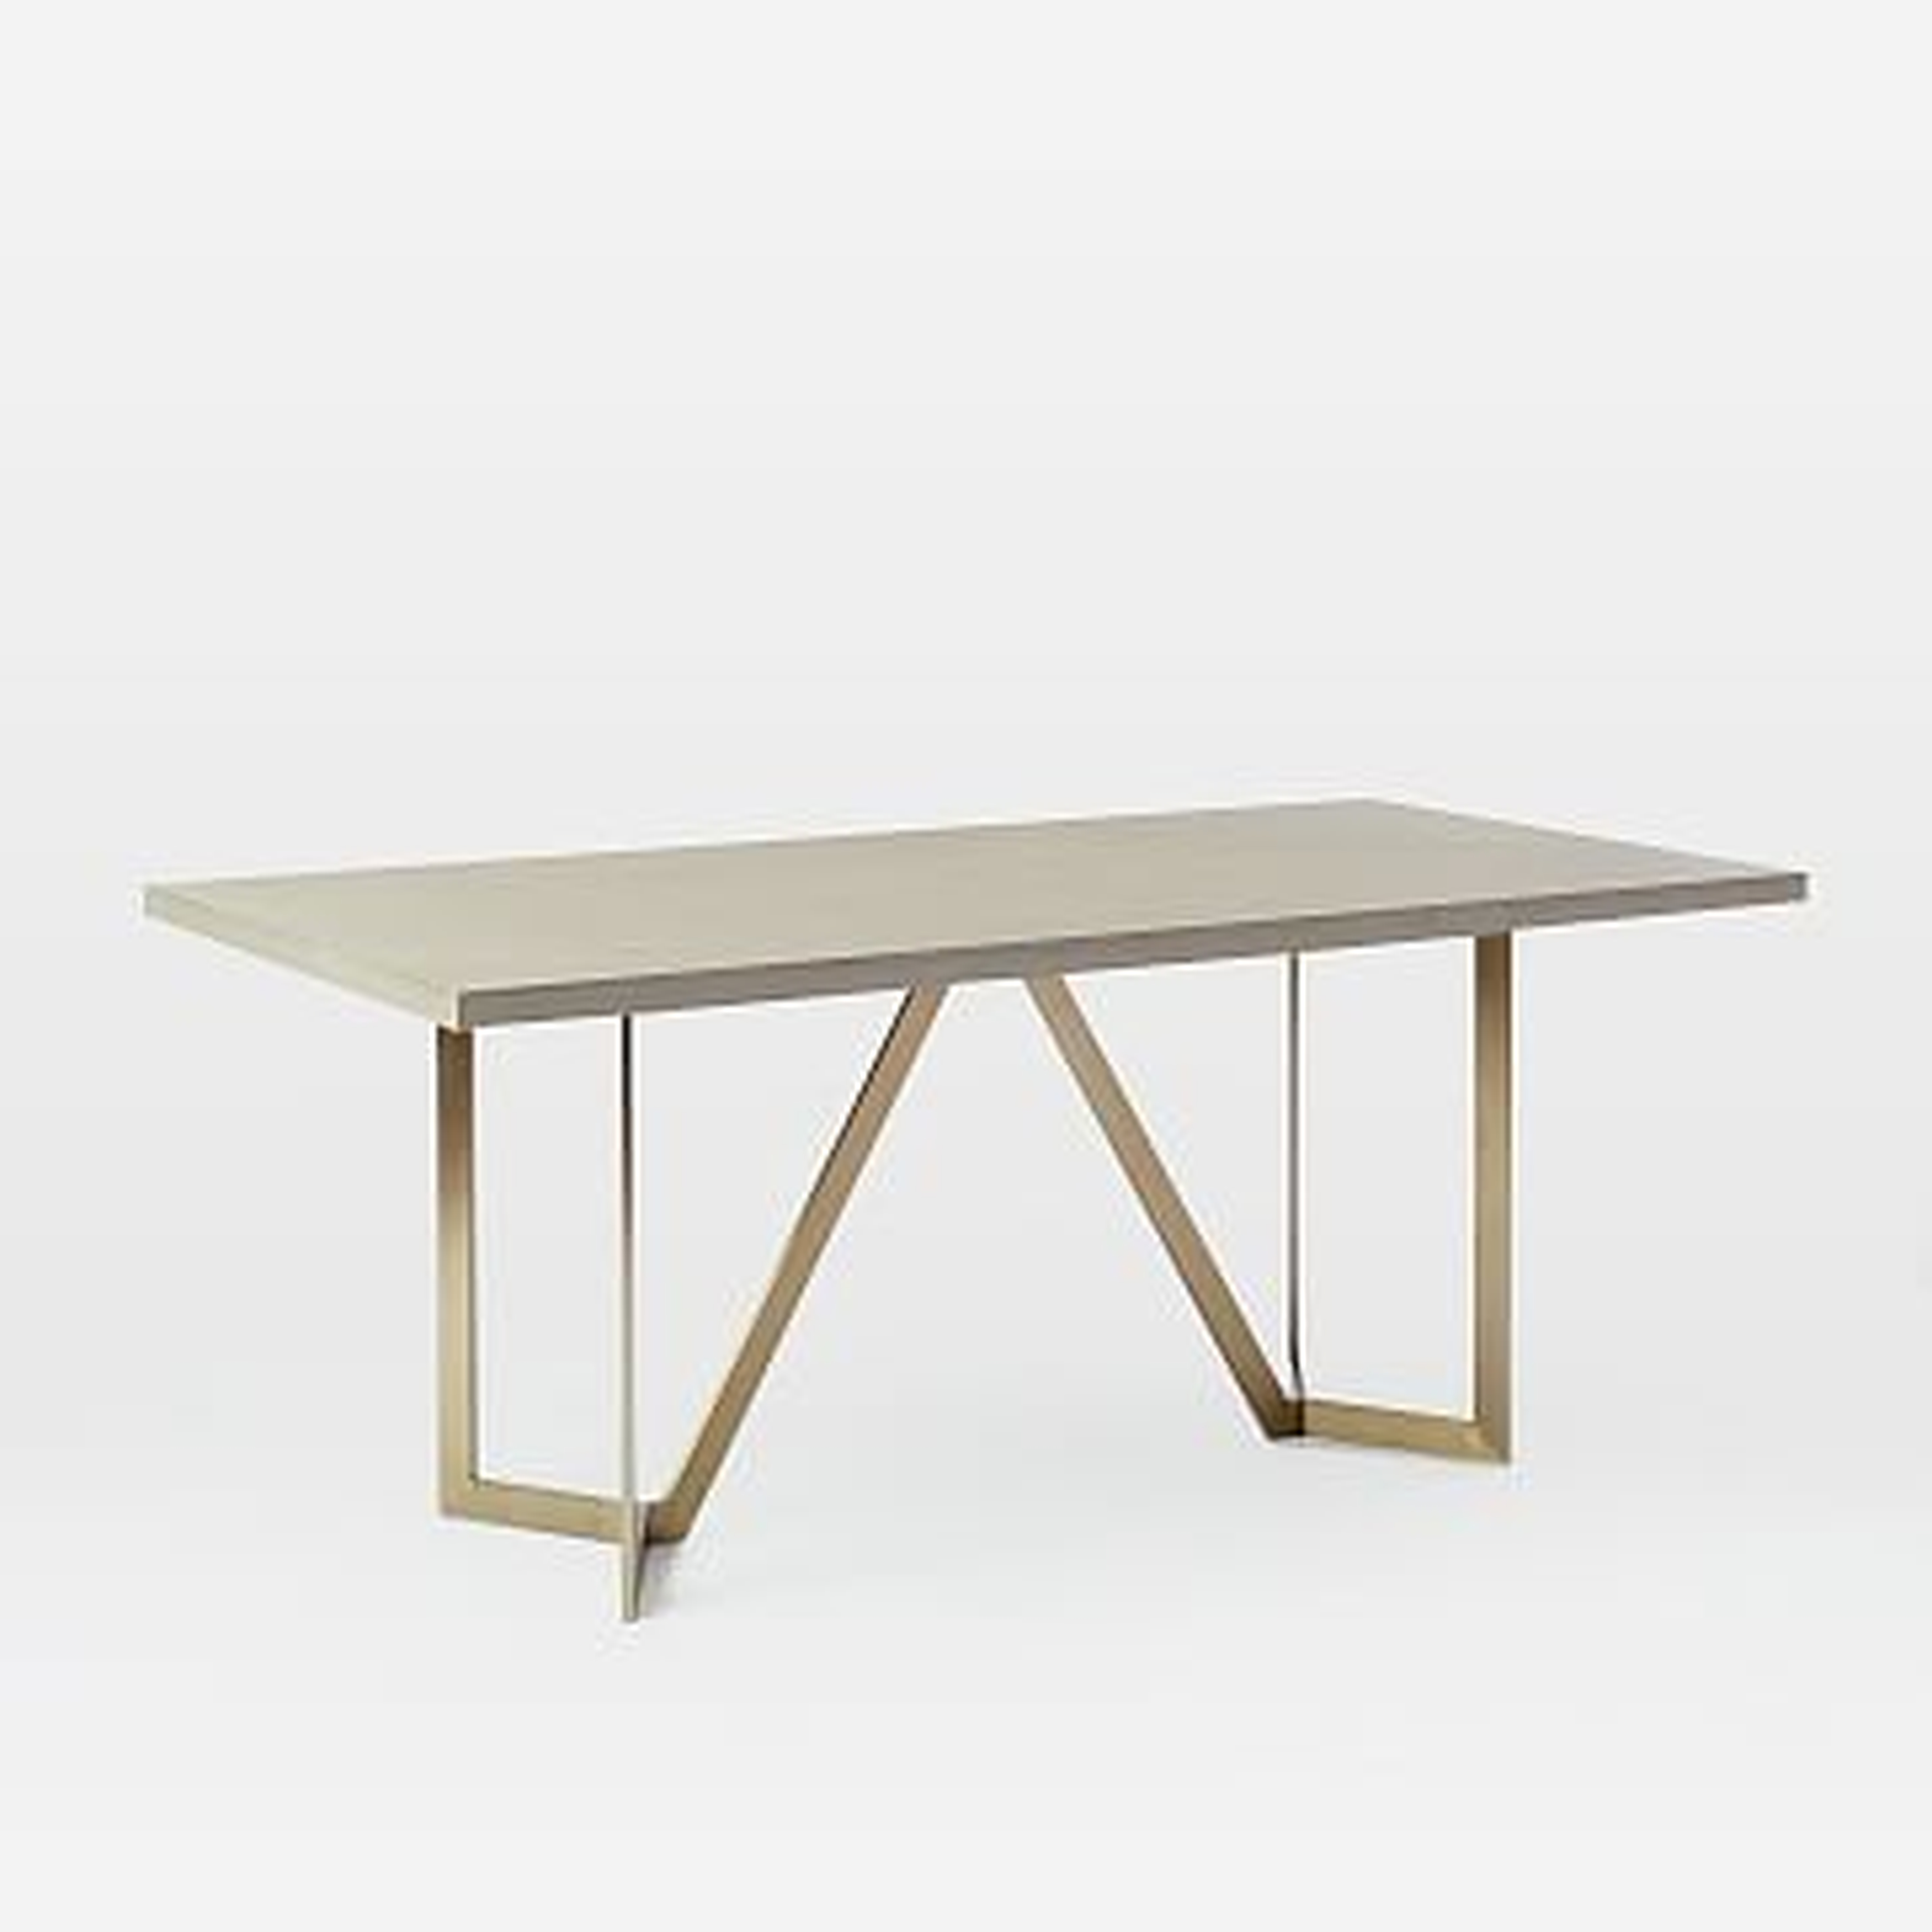 Tower Dining Table 72" Concrete, Blackened Brass - West Elm